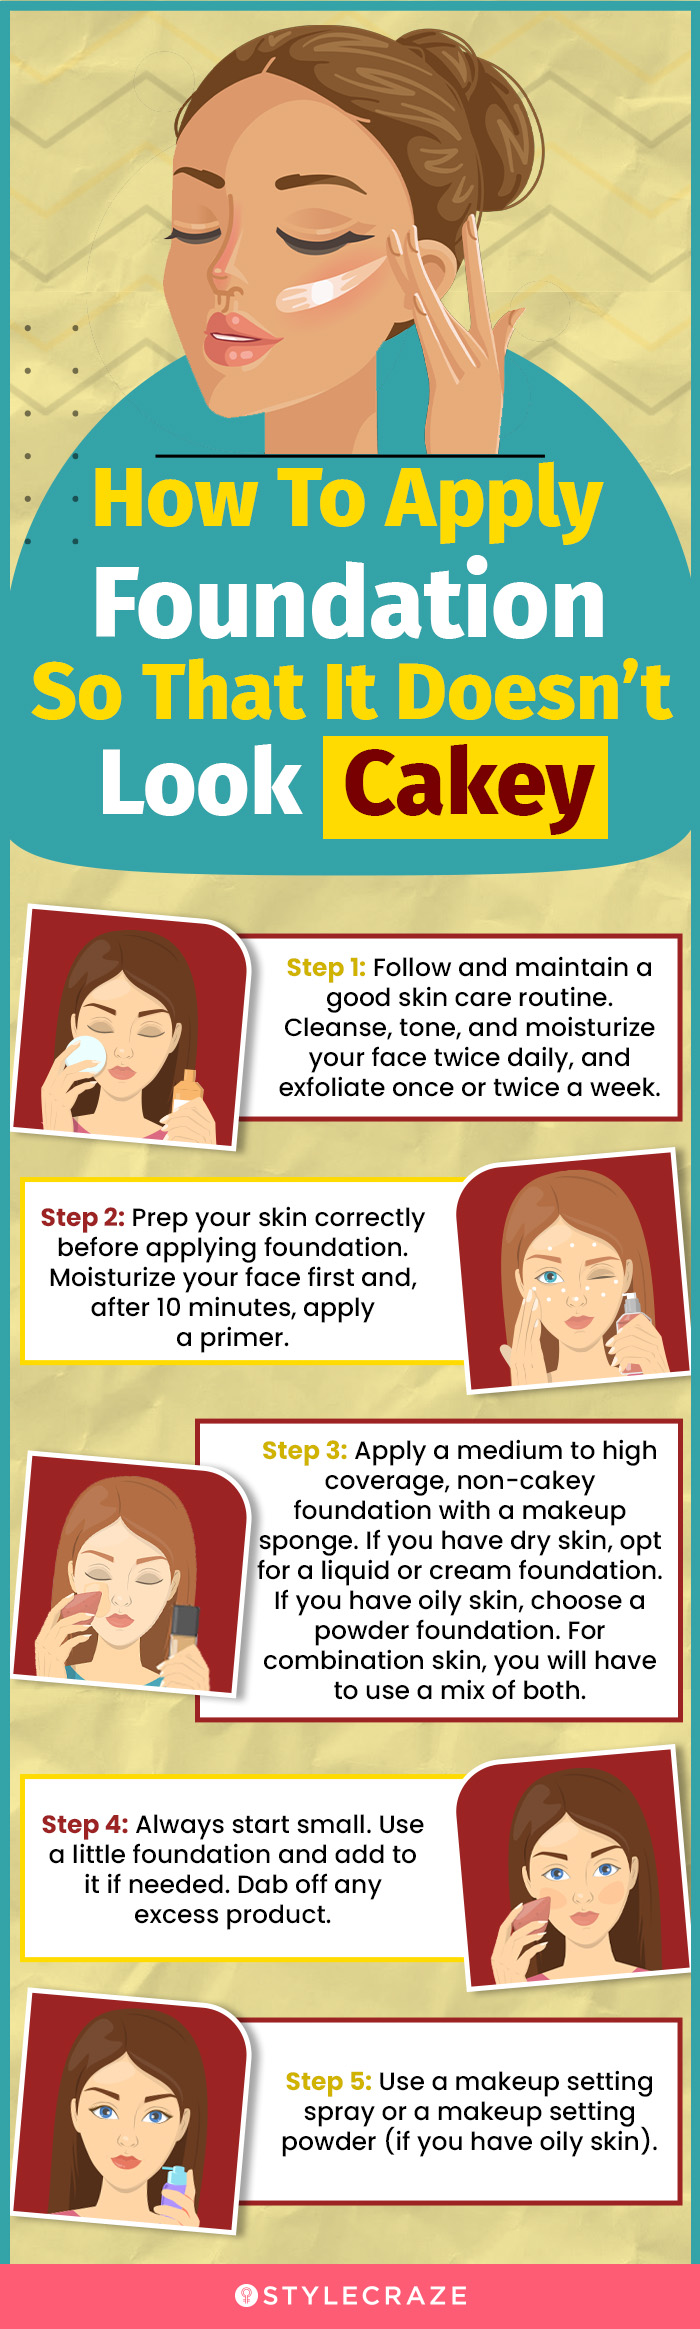 how to apply foundation so that it doesn’t look cakey (infographic)